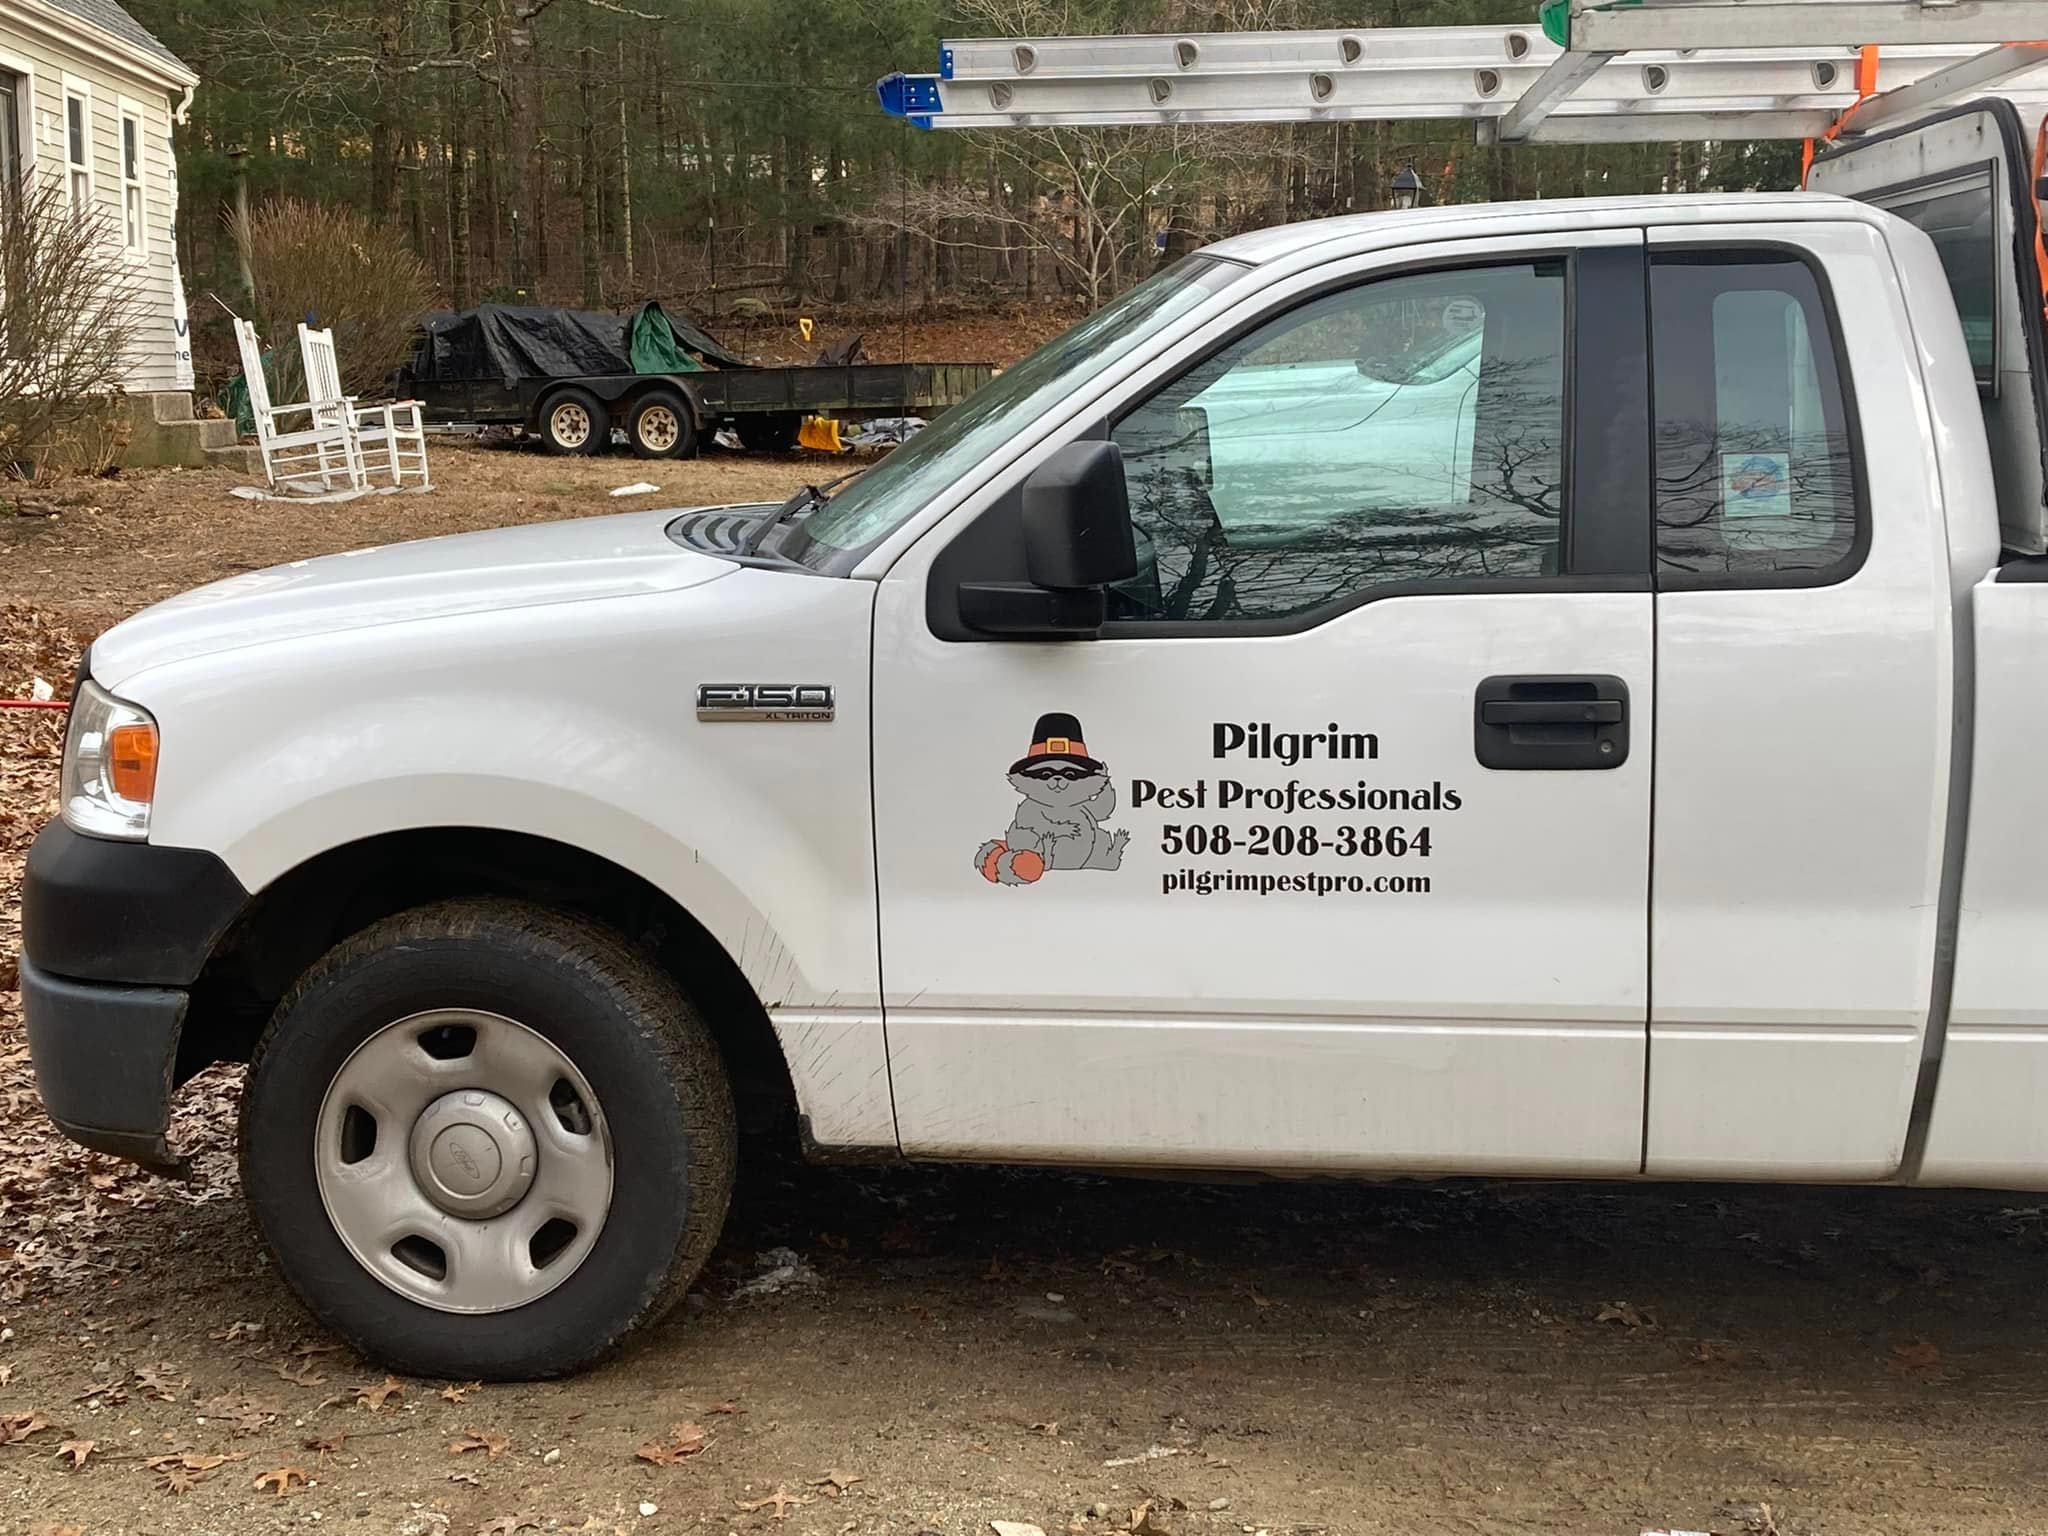 Pilgrim Pest Professionals is a pest control & wildlife control company located in Plymouth, MA.